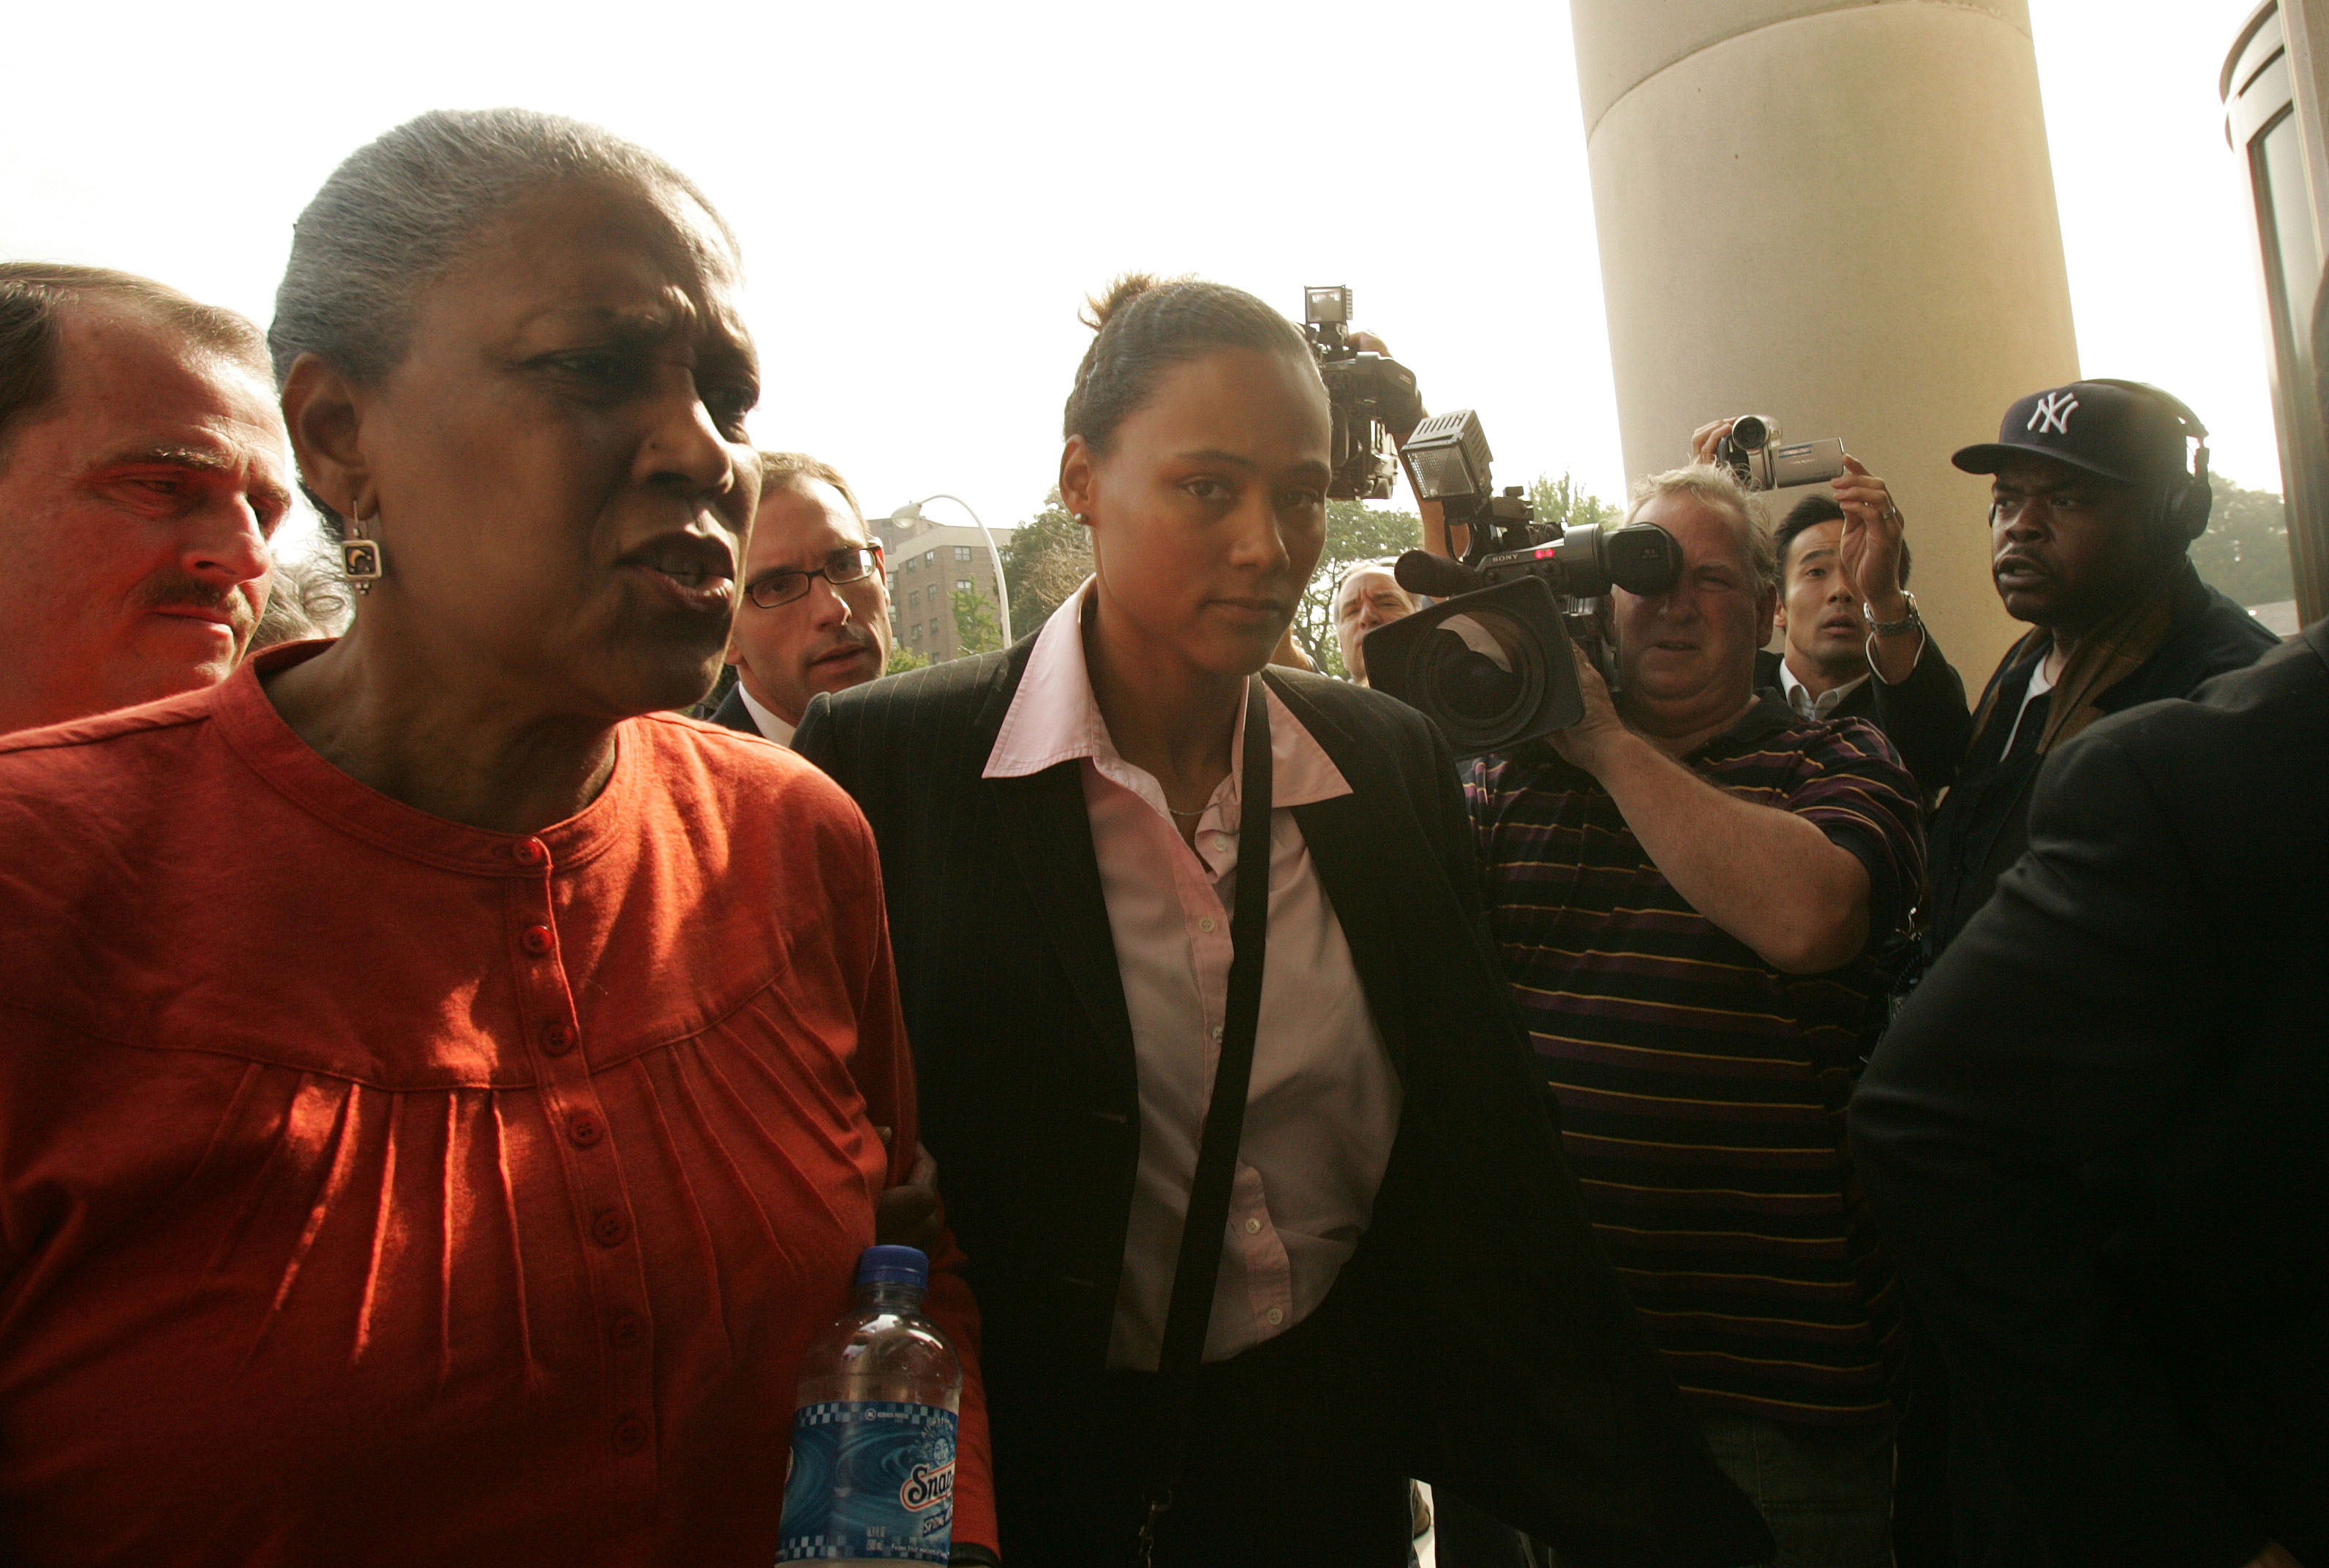 WHITE PLAINS, NY - OCTOBER 5:  Three-time Olympic gold medalist Marion Jones (C) enters a United States federal courthouse October 5, 2007 in White Plains, New York. Jones is expected to plead guilty to charges in connection with steroid use.  (Photo by H